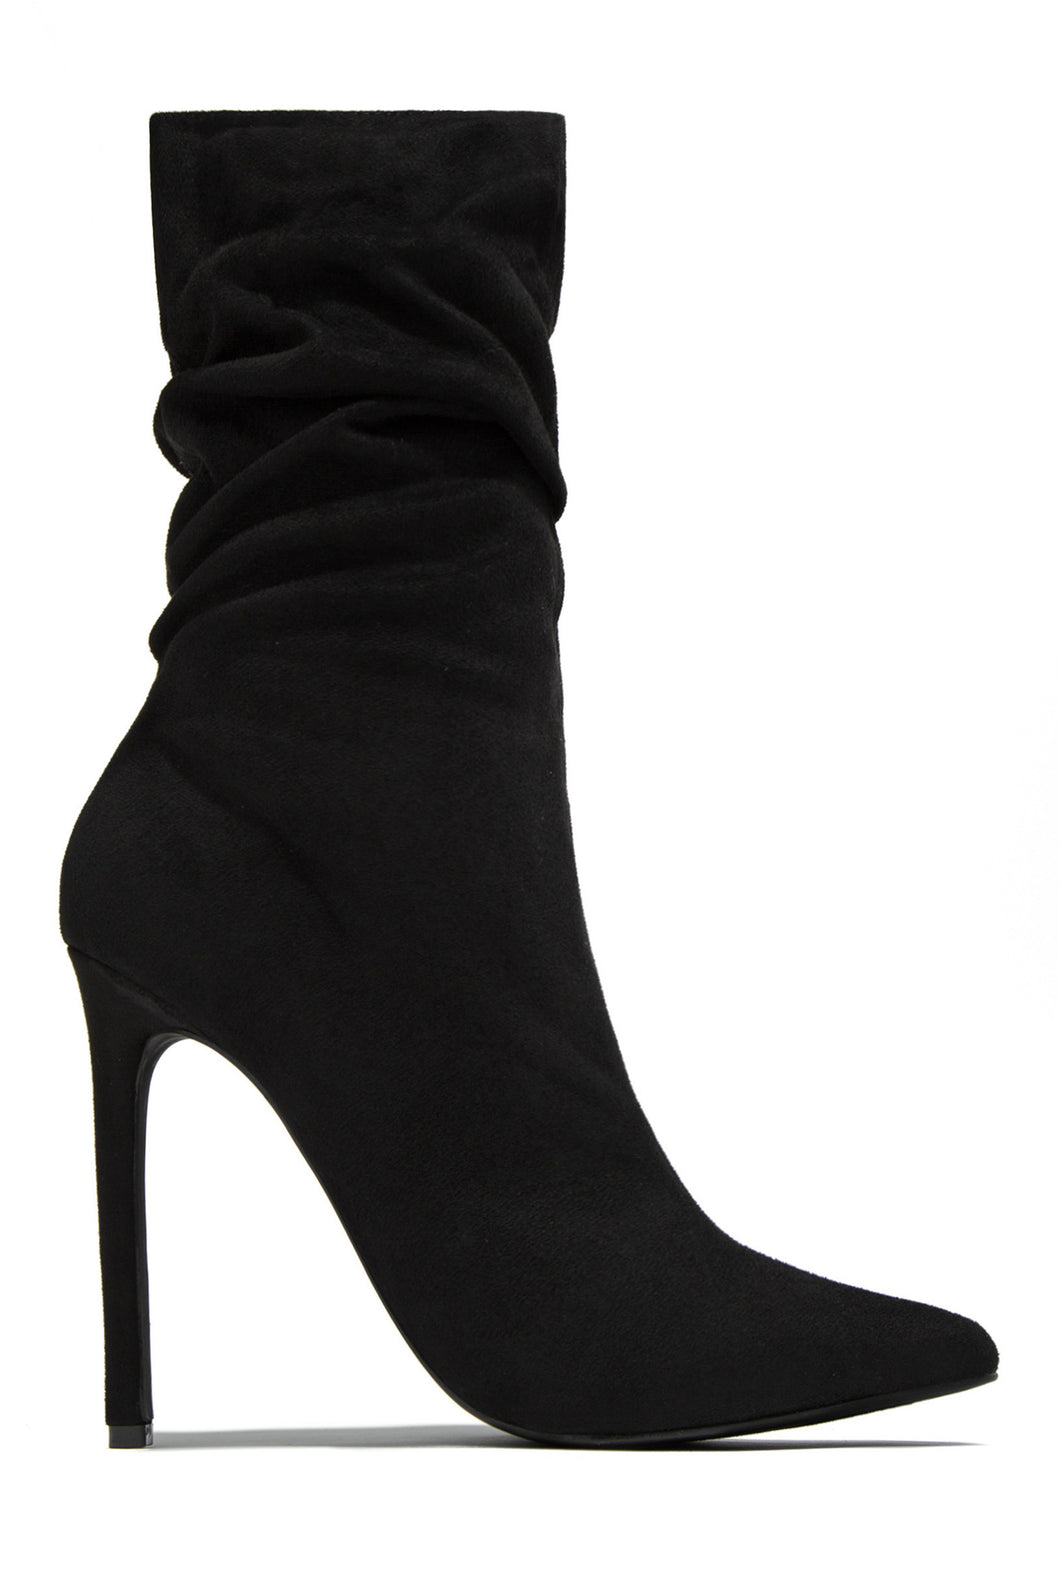 Solemate Ruched Detailed Ankle Heel Boots - Black